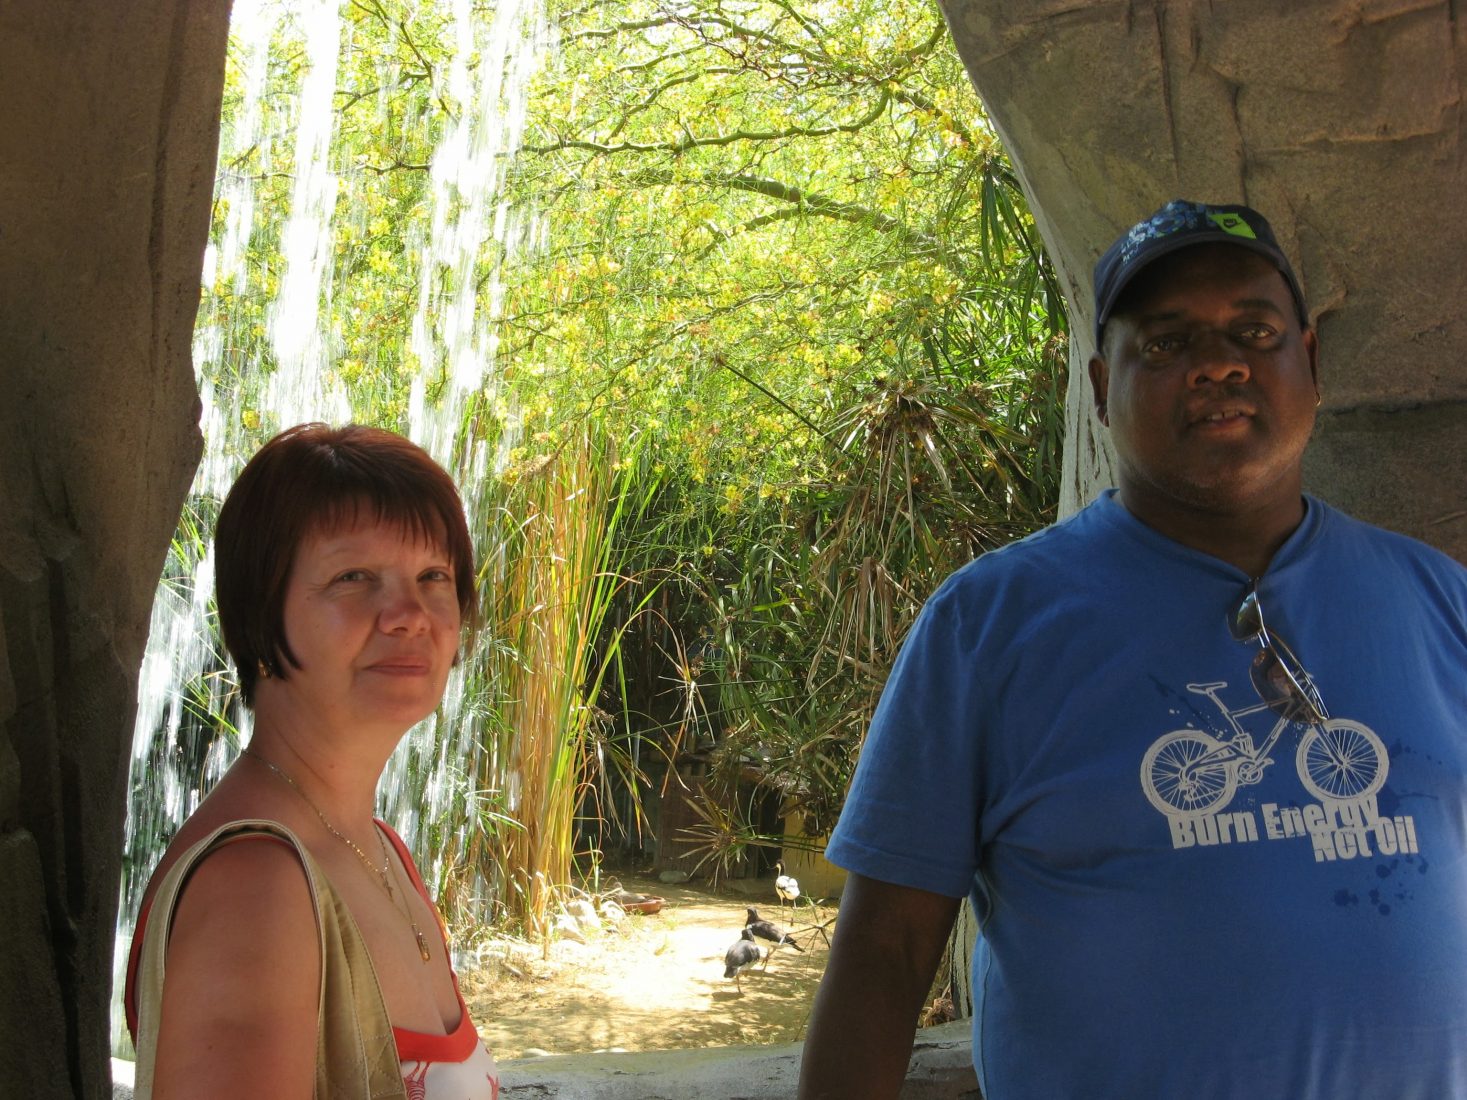 A white woman with short reddish hair and a black man wearing a blue t-shirt face the camera. In the background the sunlight catches on the leaves of the trees. 